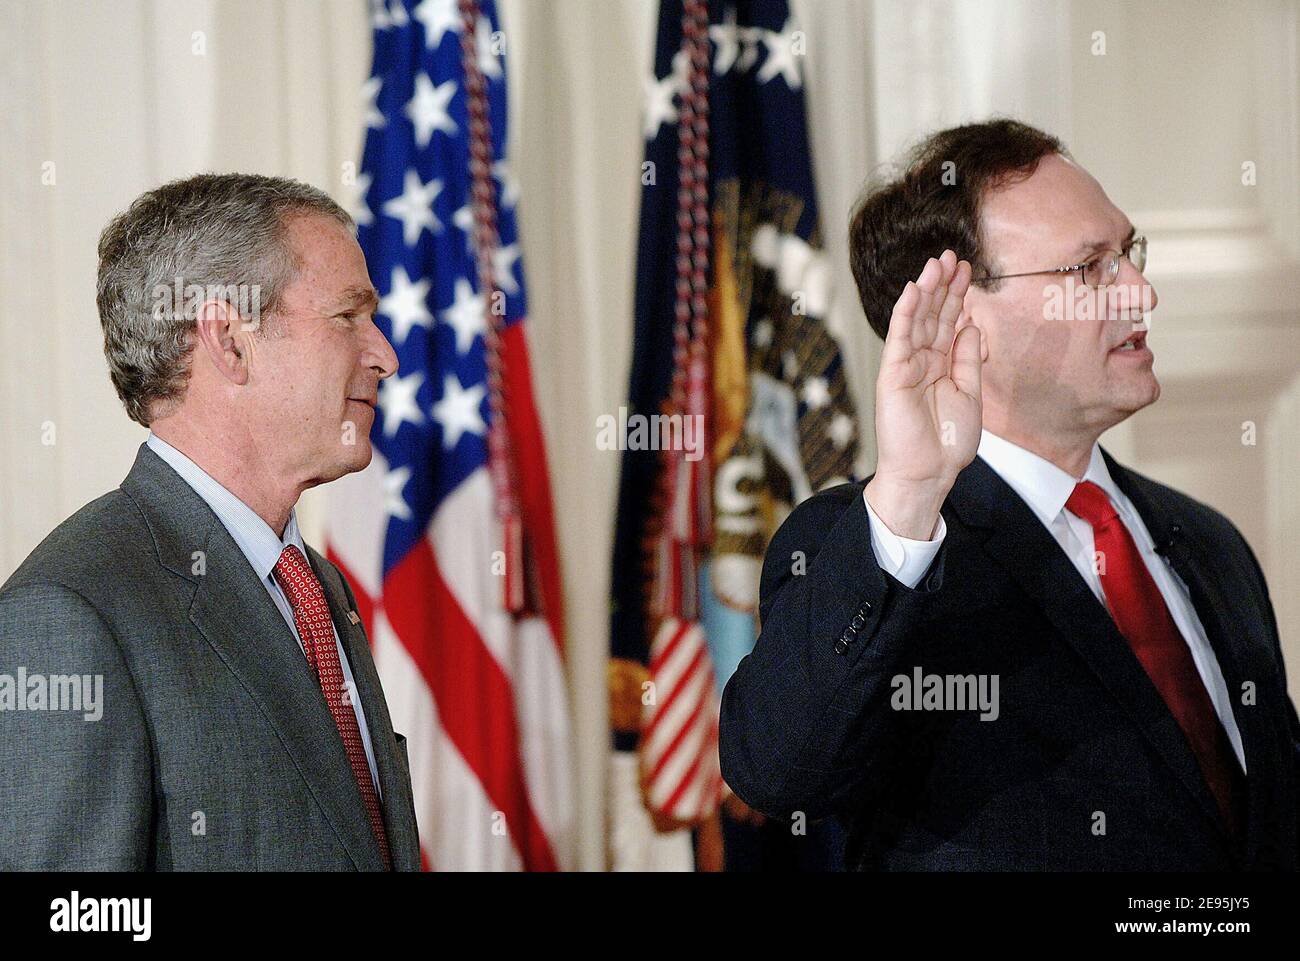 U.S. Supreme Court Justice Samuel Alito is sworn in as President Bush looks on during a ceremonial swearing-in at the East Room of the White House February 1, 2006 in Washington, DC. Photo by Olivier Douliery/ABACAPRESS.COM Stock Photo